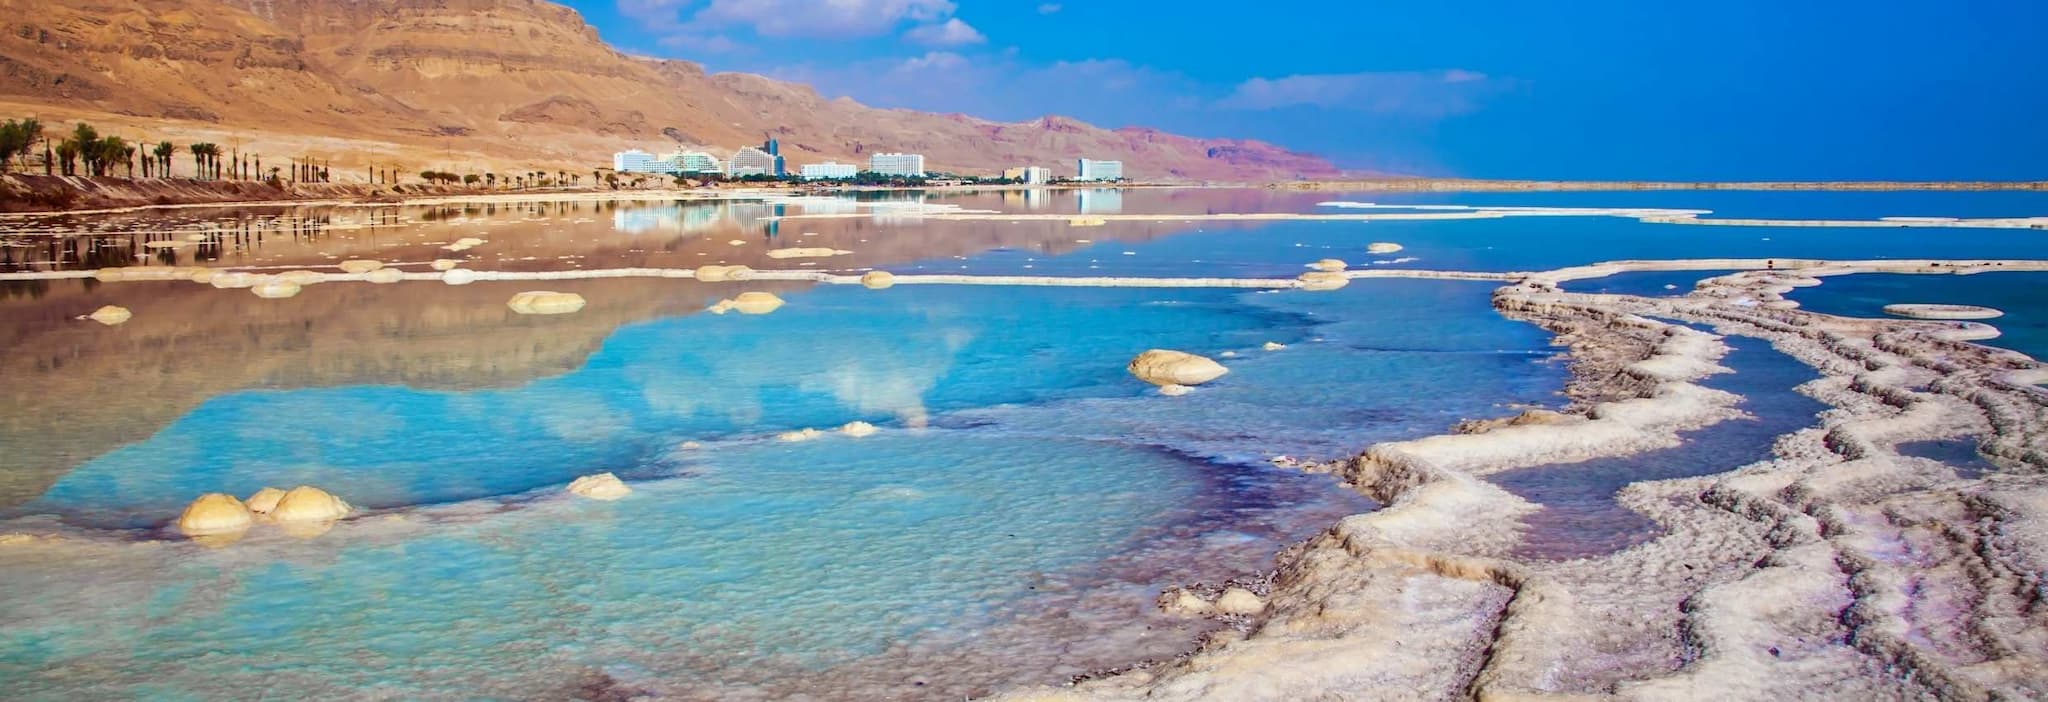 Mysteries of the Dead Sea